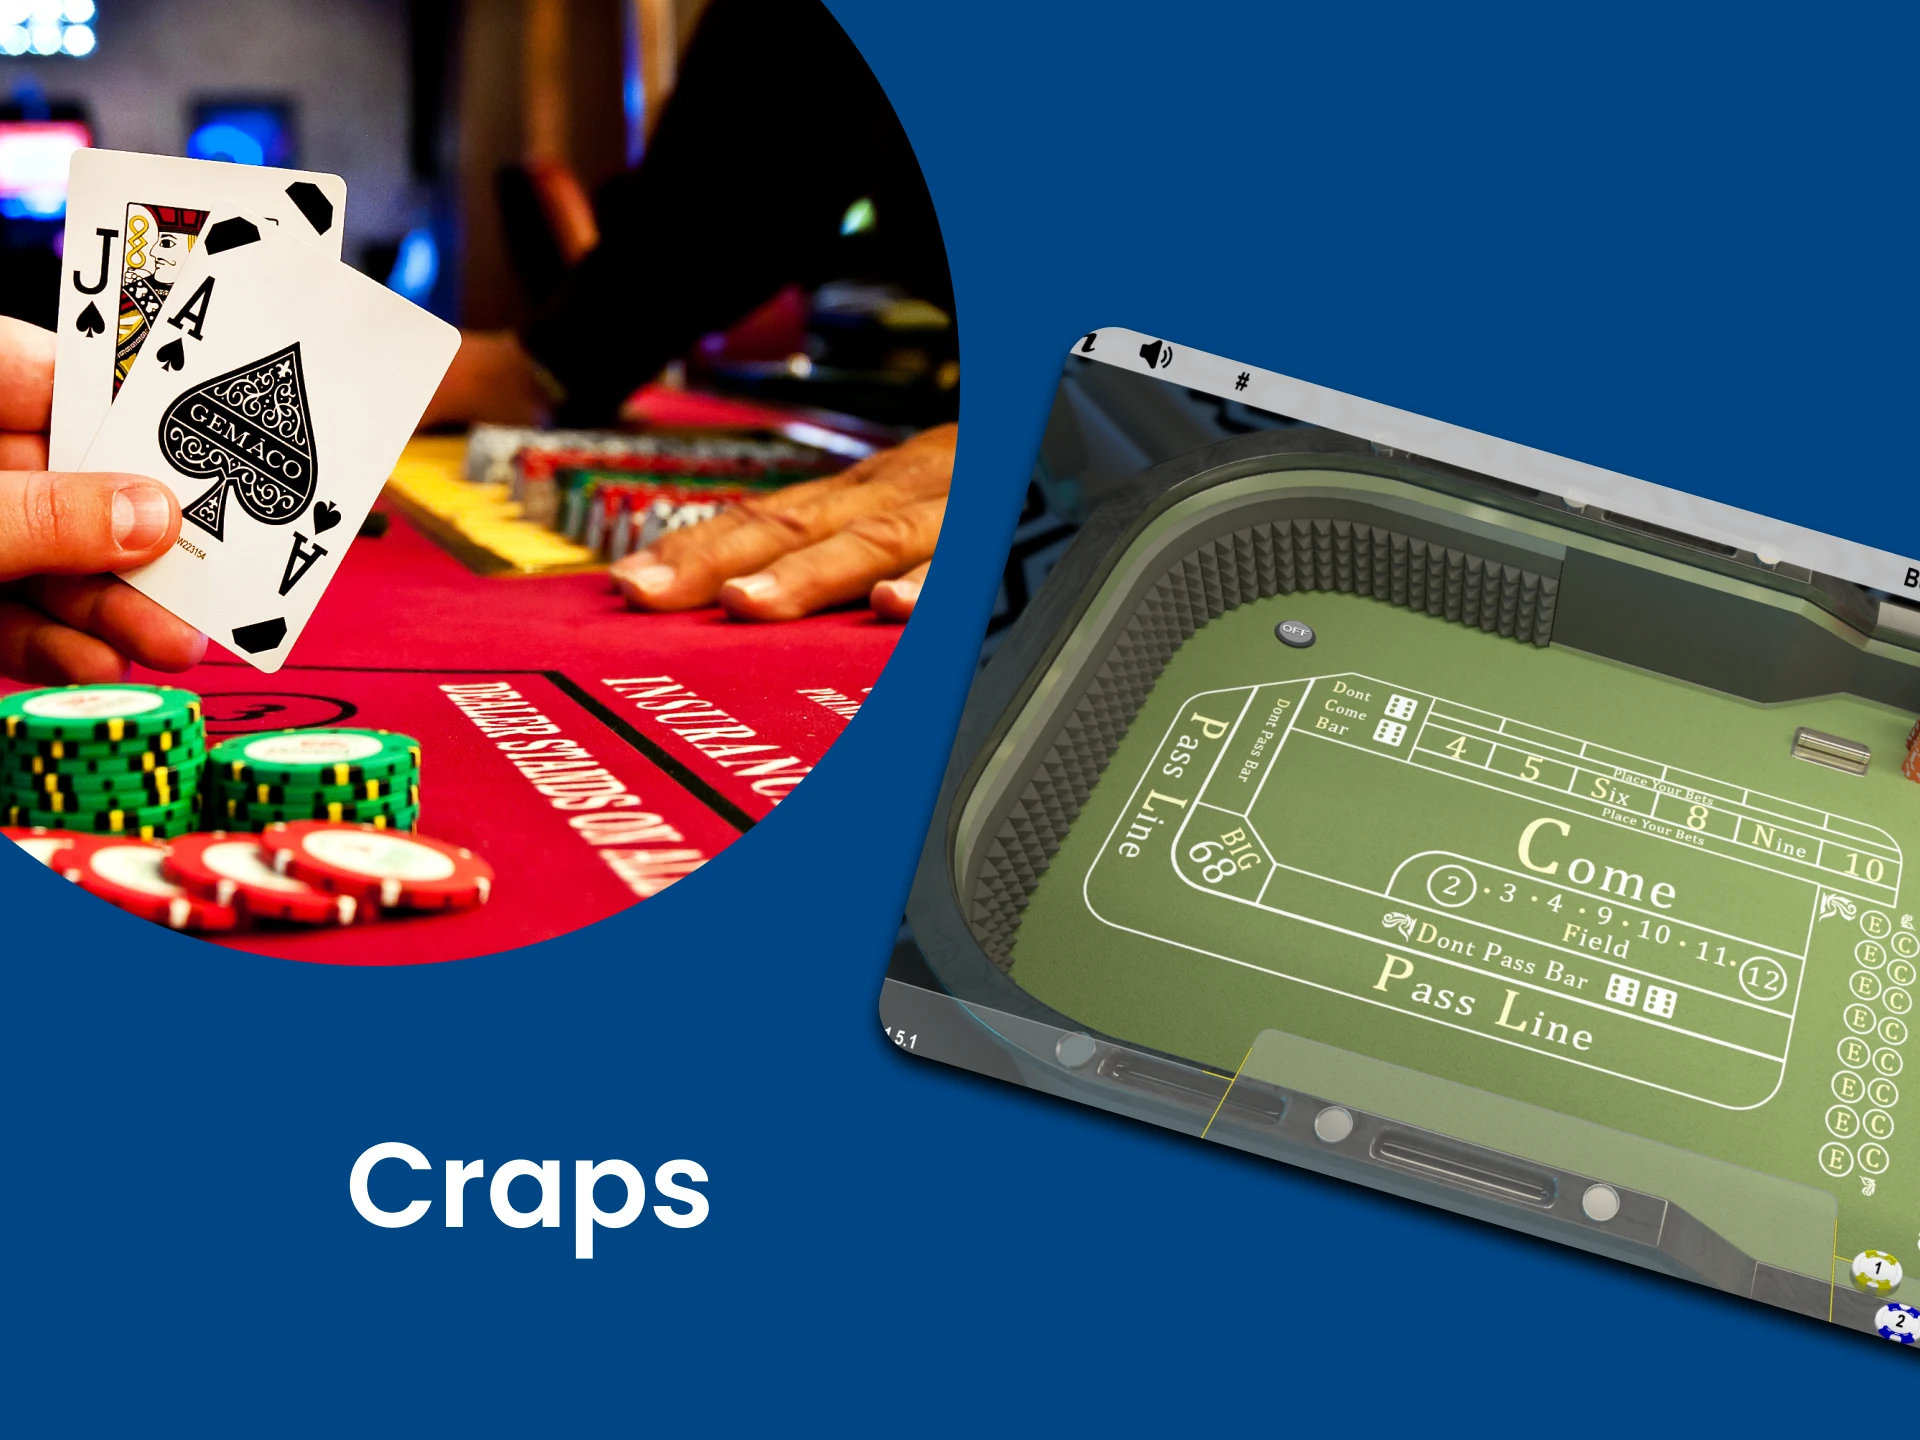 Select the Craps section for casino games.